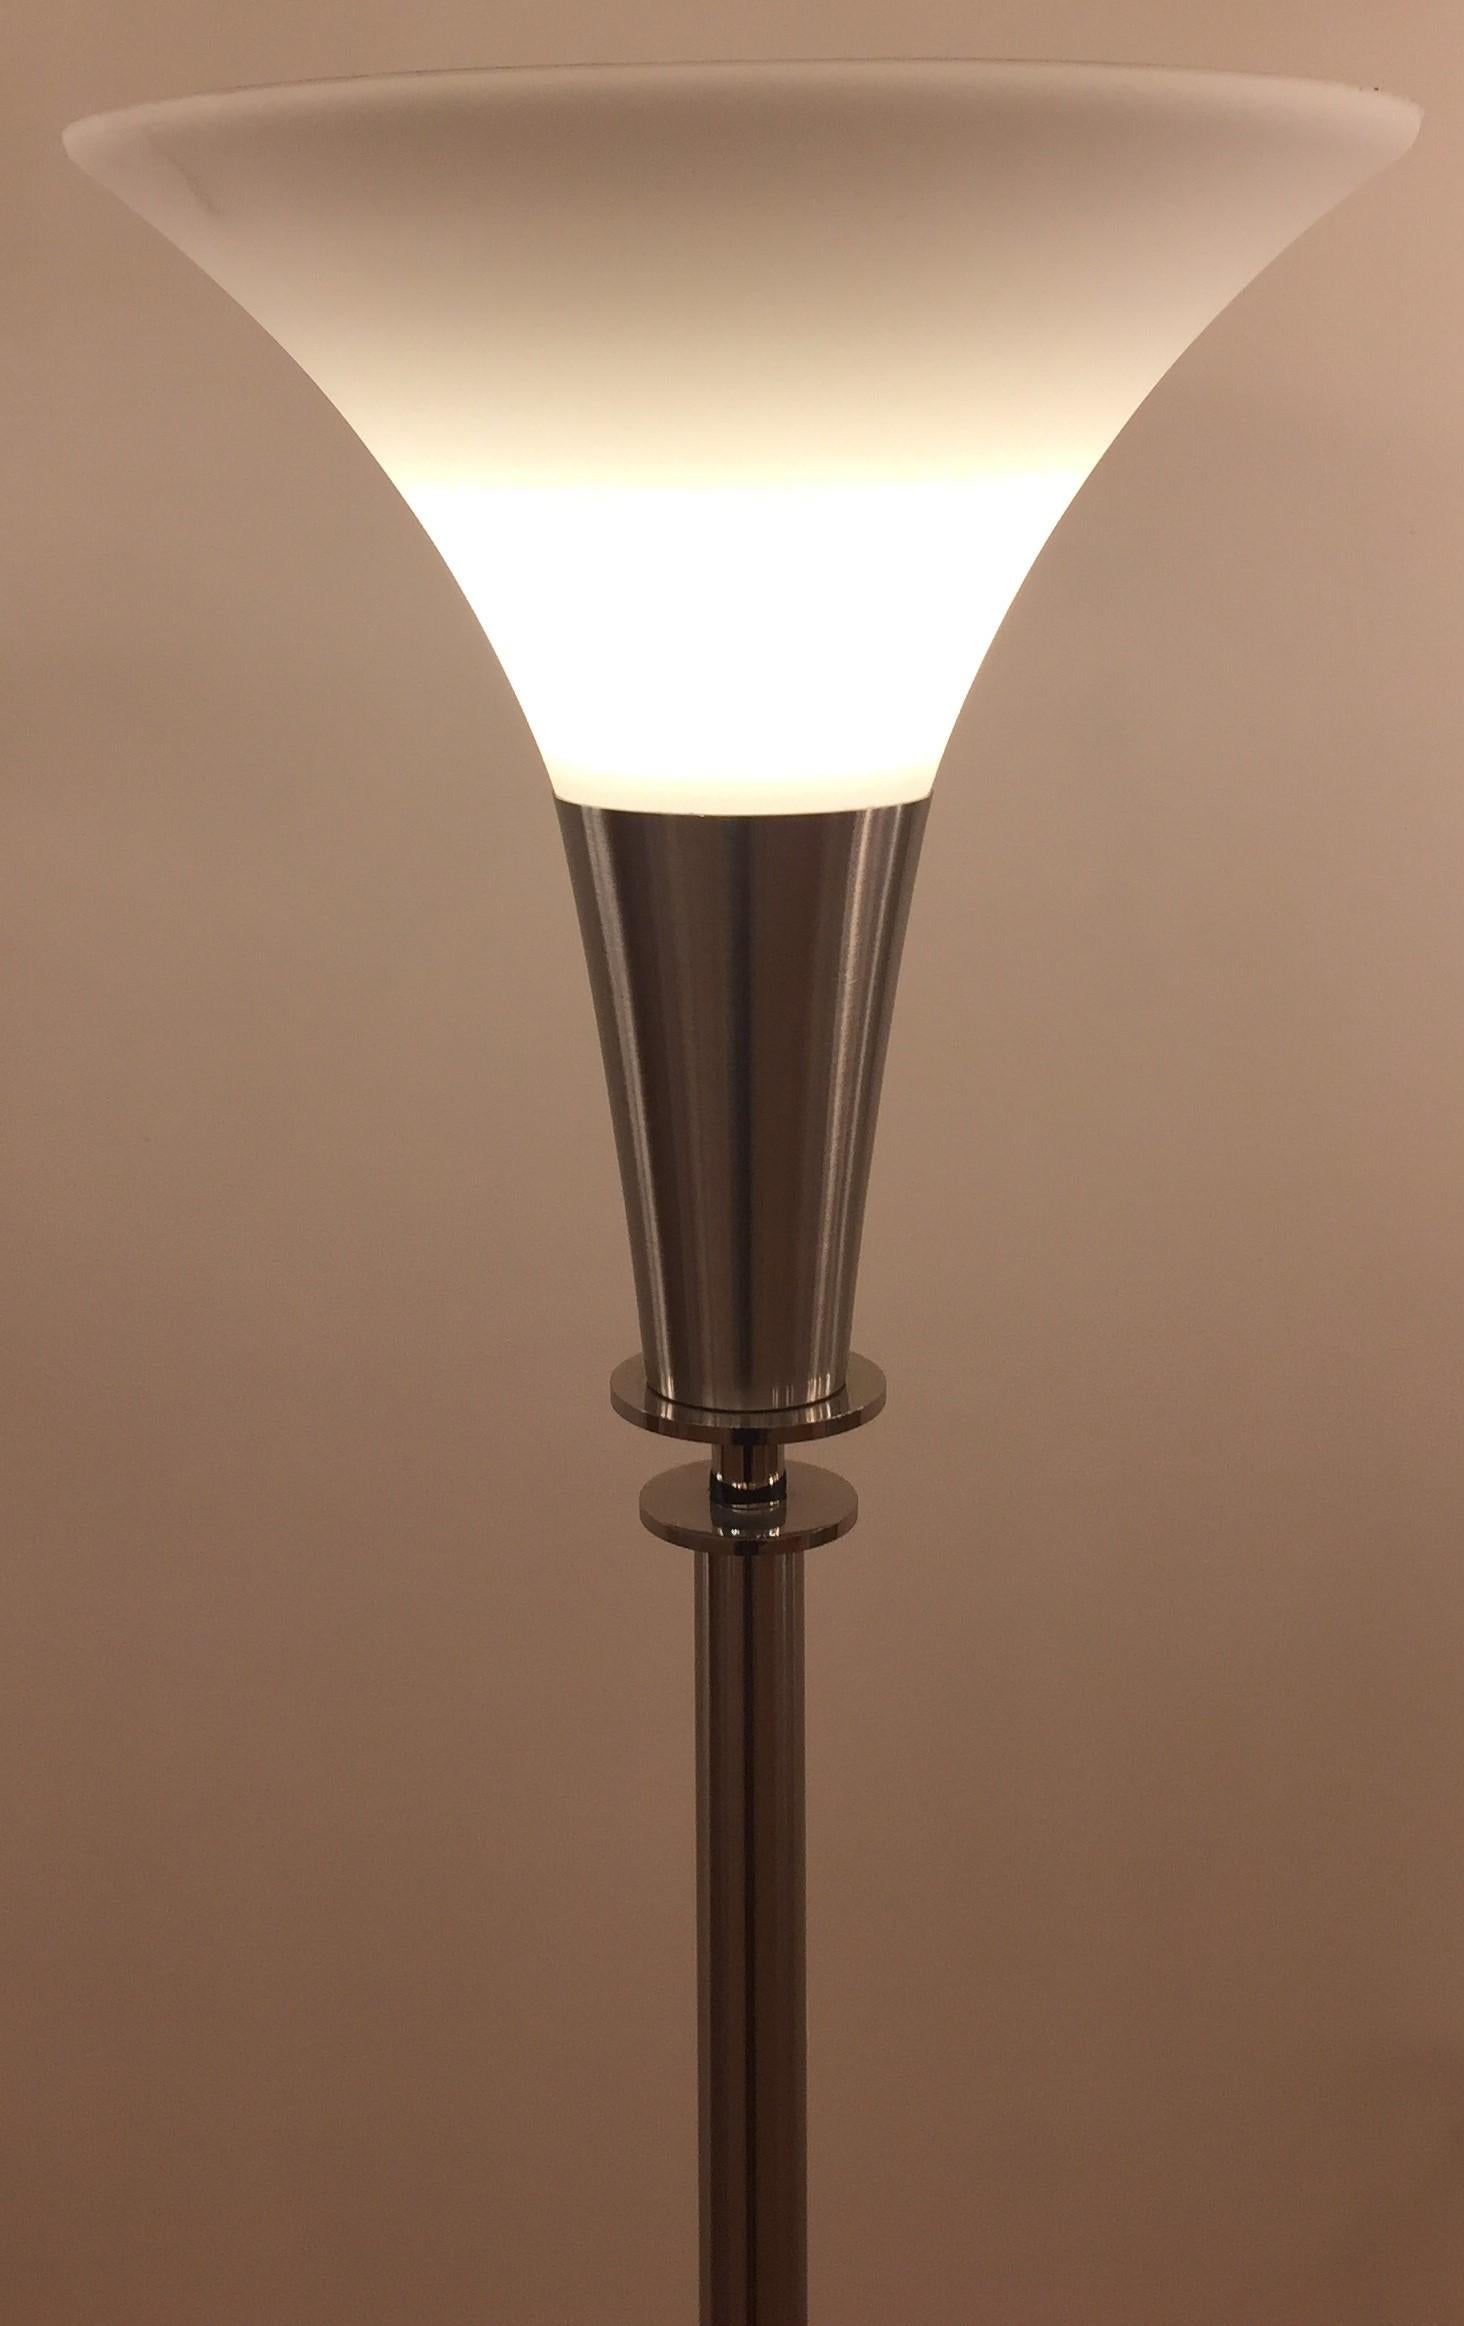 Floor lamp inspired by the Art Deco spirit with a light dimmer.